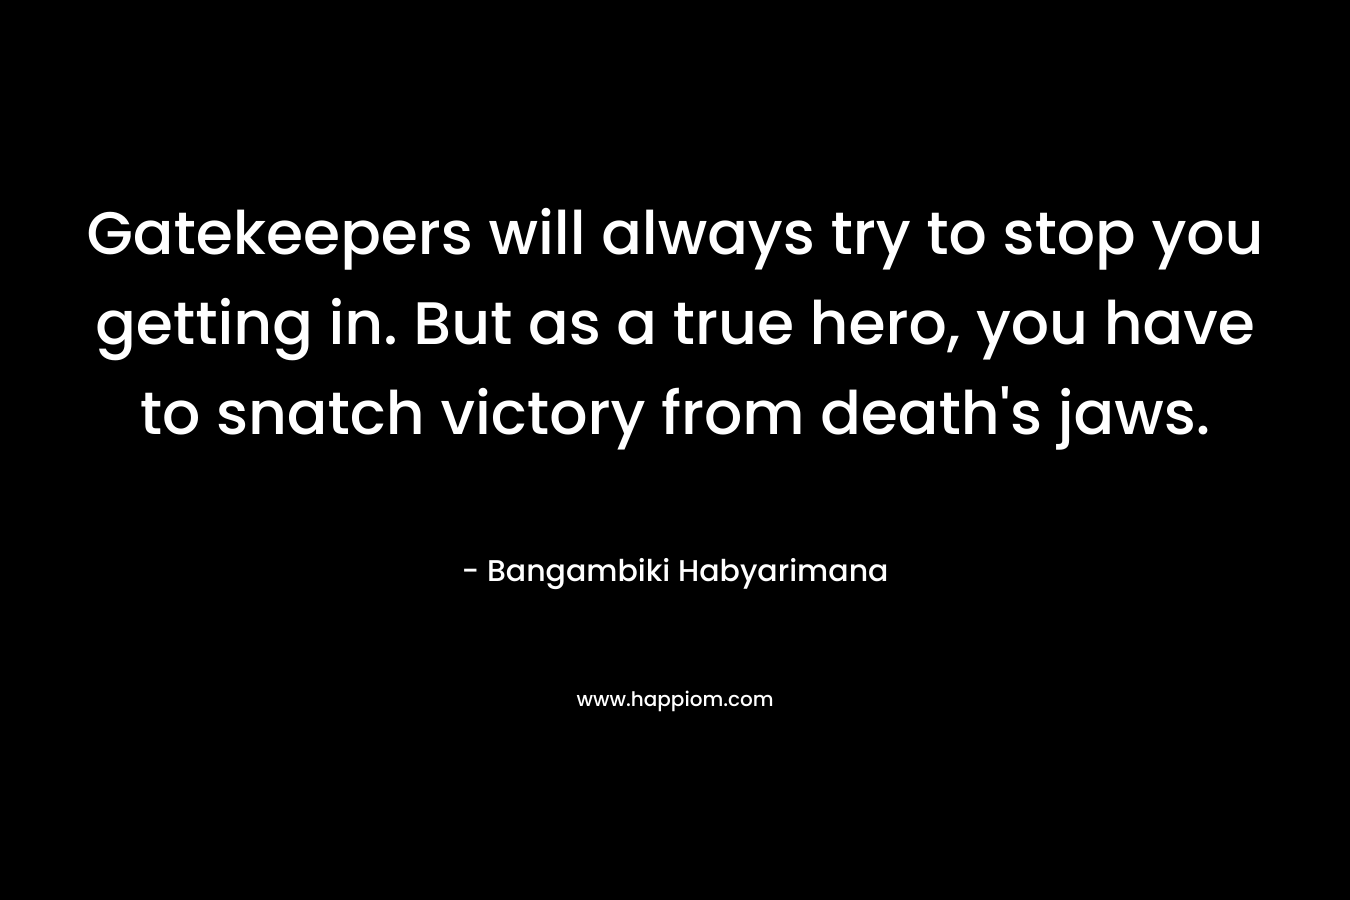 Gatekeepers will always try to stop you getting in. But as a true hero, you have to snatch victory from death's jaws.